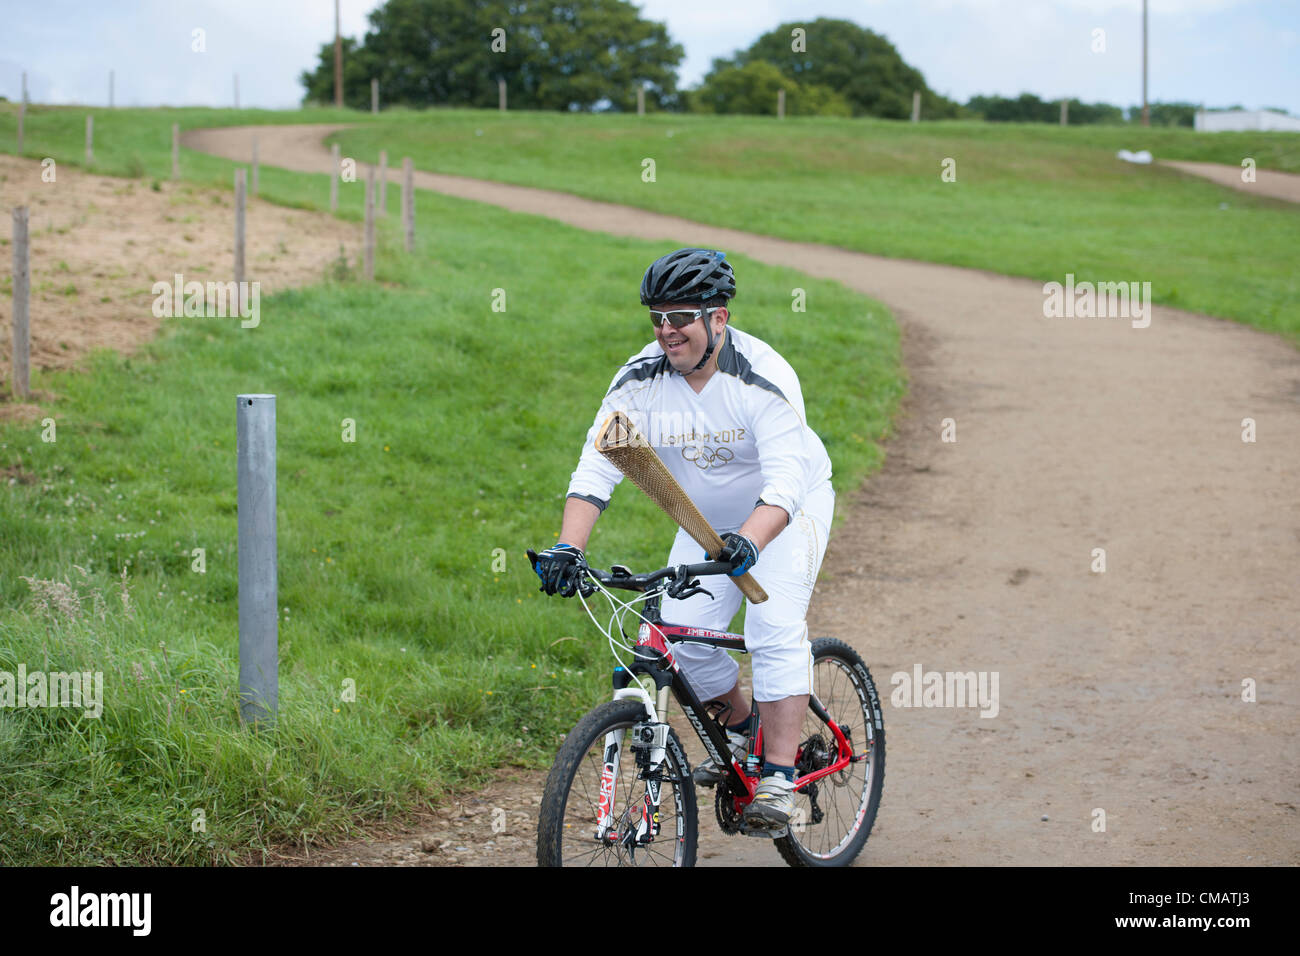 6th July 2012. Hadleigh Farm, Hadleigh,Essex,UK. The Olympic Torch relay visited the mountain bike course at Hadleigh Farm in the south of Essex. Dan Jarvis carried the torch on a short loop of the course before handing over to the next runner, Kim Axford. Stock Photo